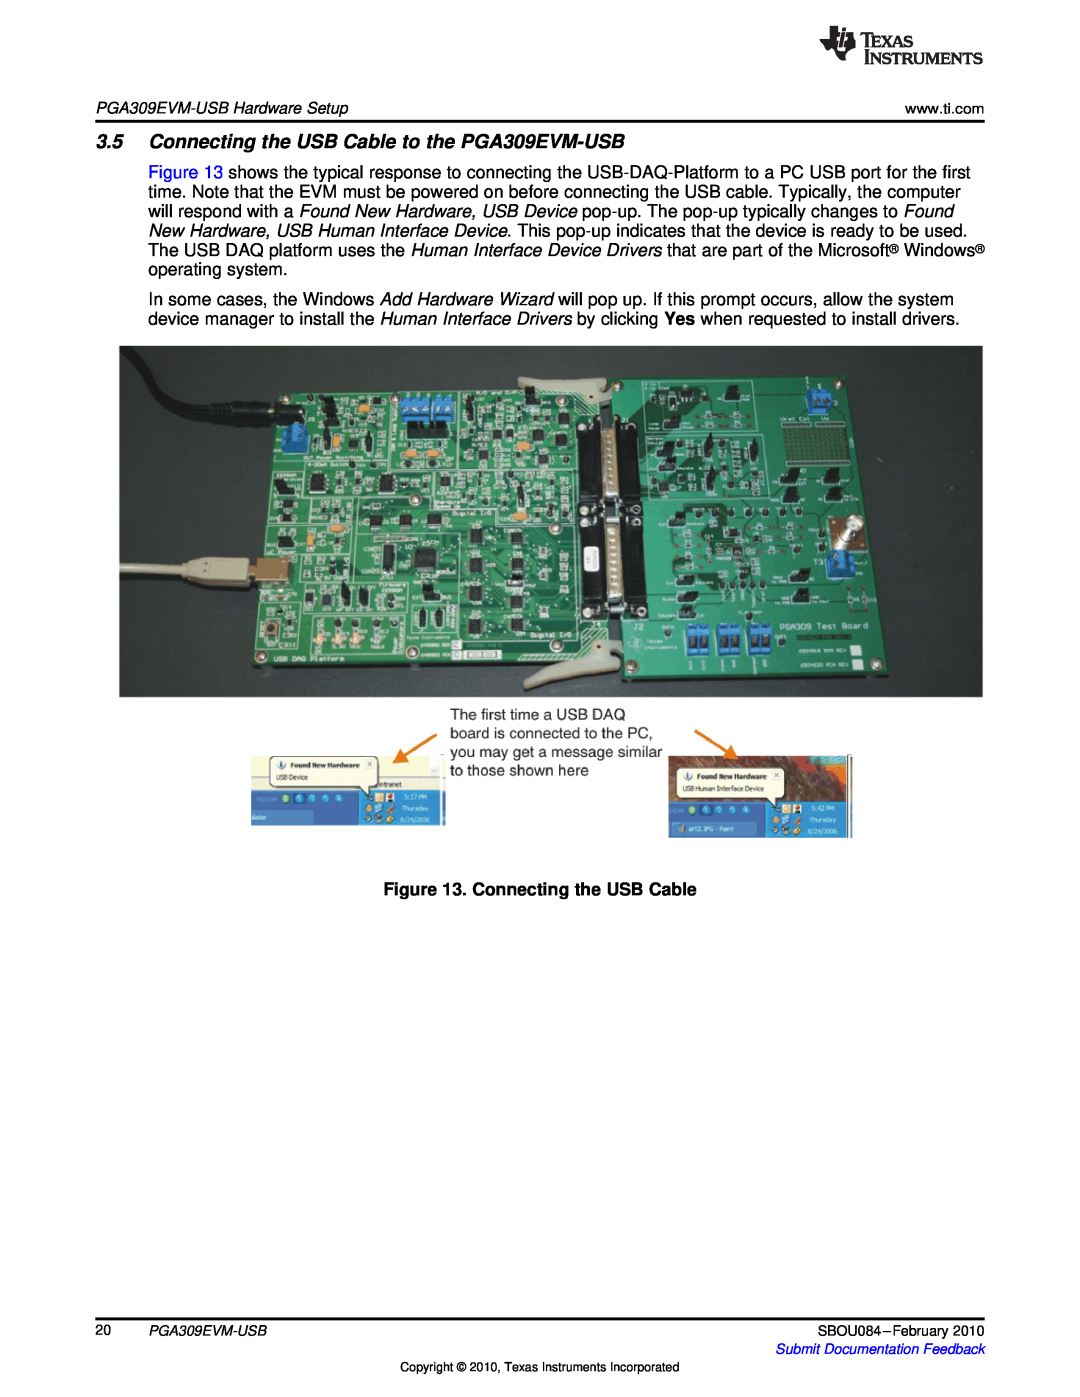 Texas Instruments manual Connecting the USB Cable to the PGA309EVM-USB 